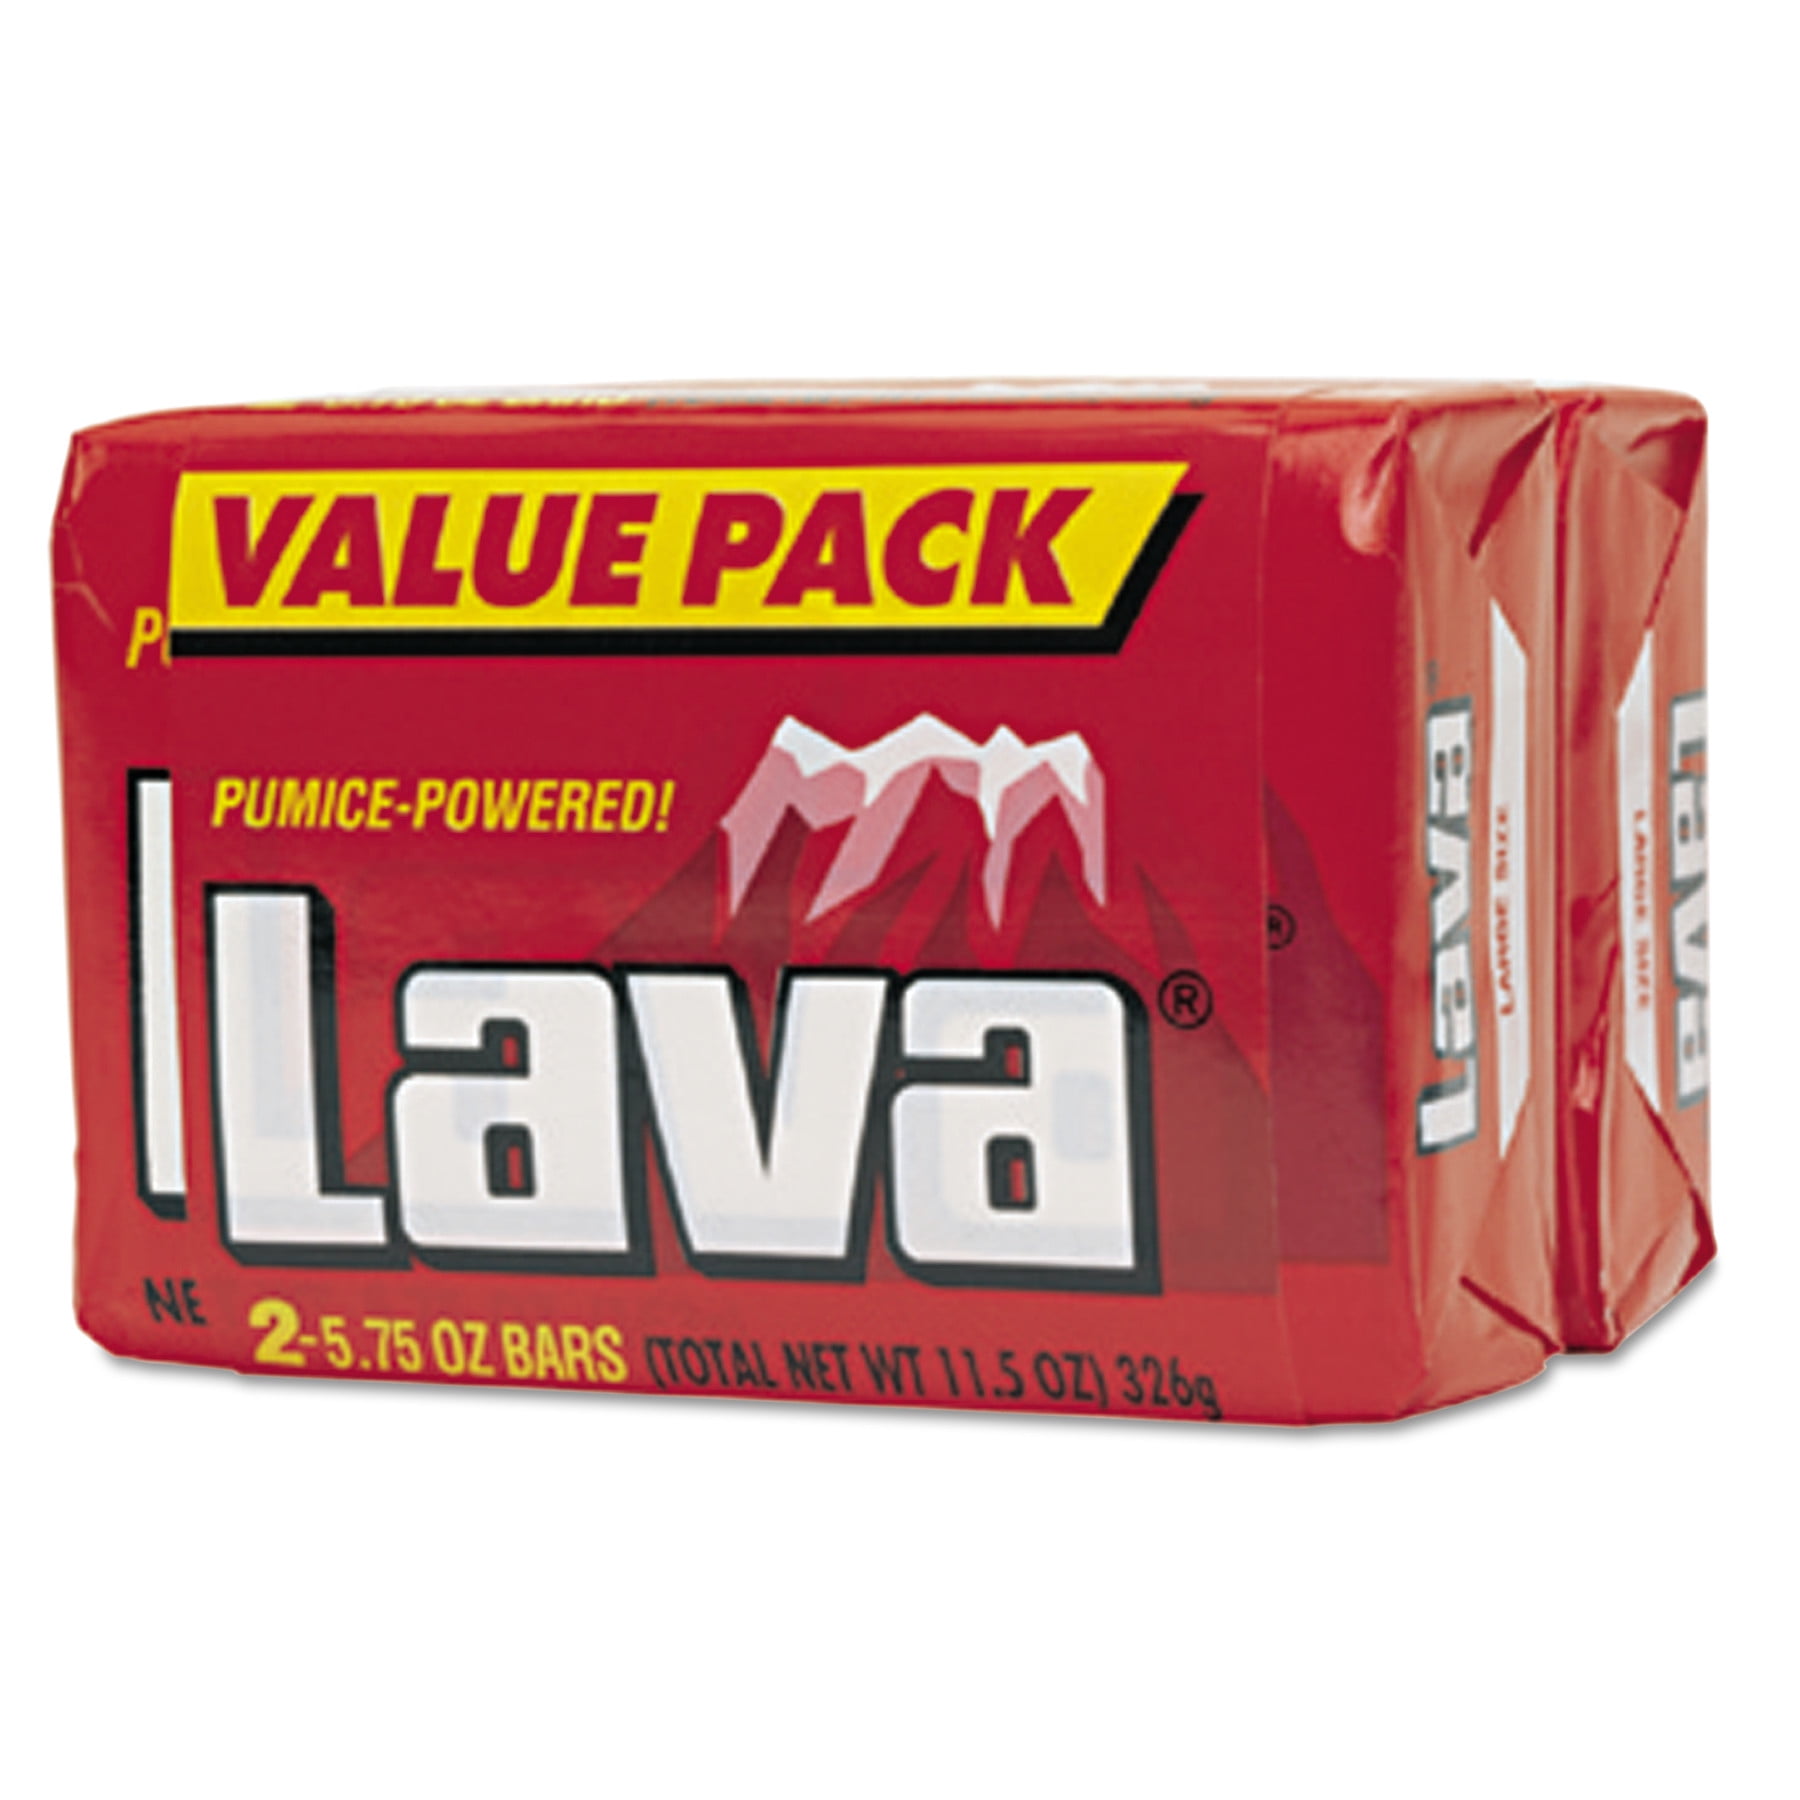 Lava Heavy-Duty Hand Cleaner: Better than Soap for Removing the Toughest  Grease & Grime